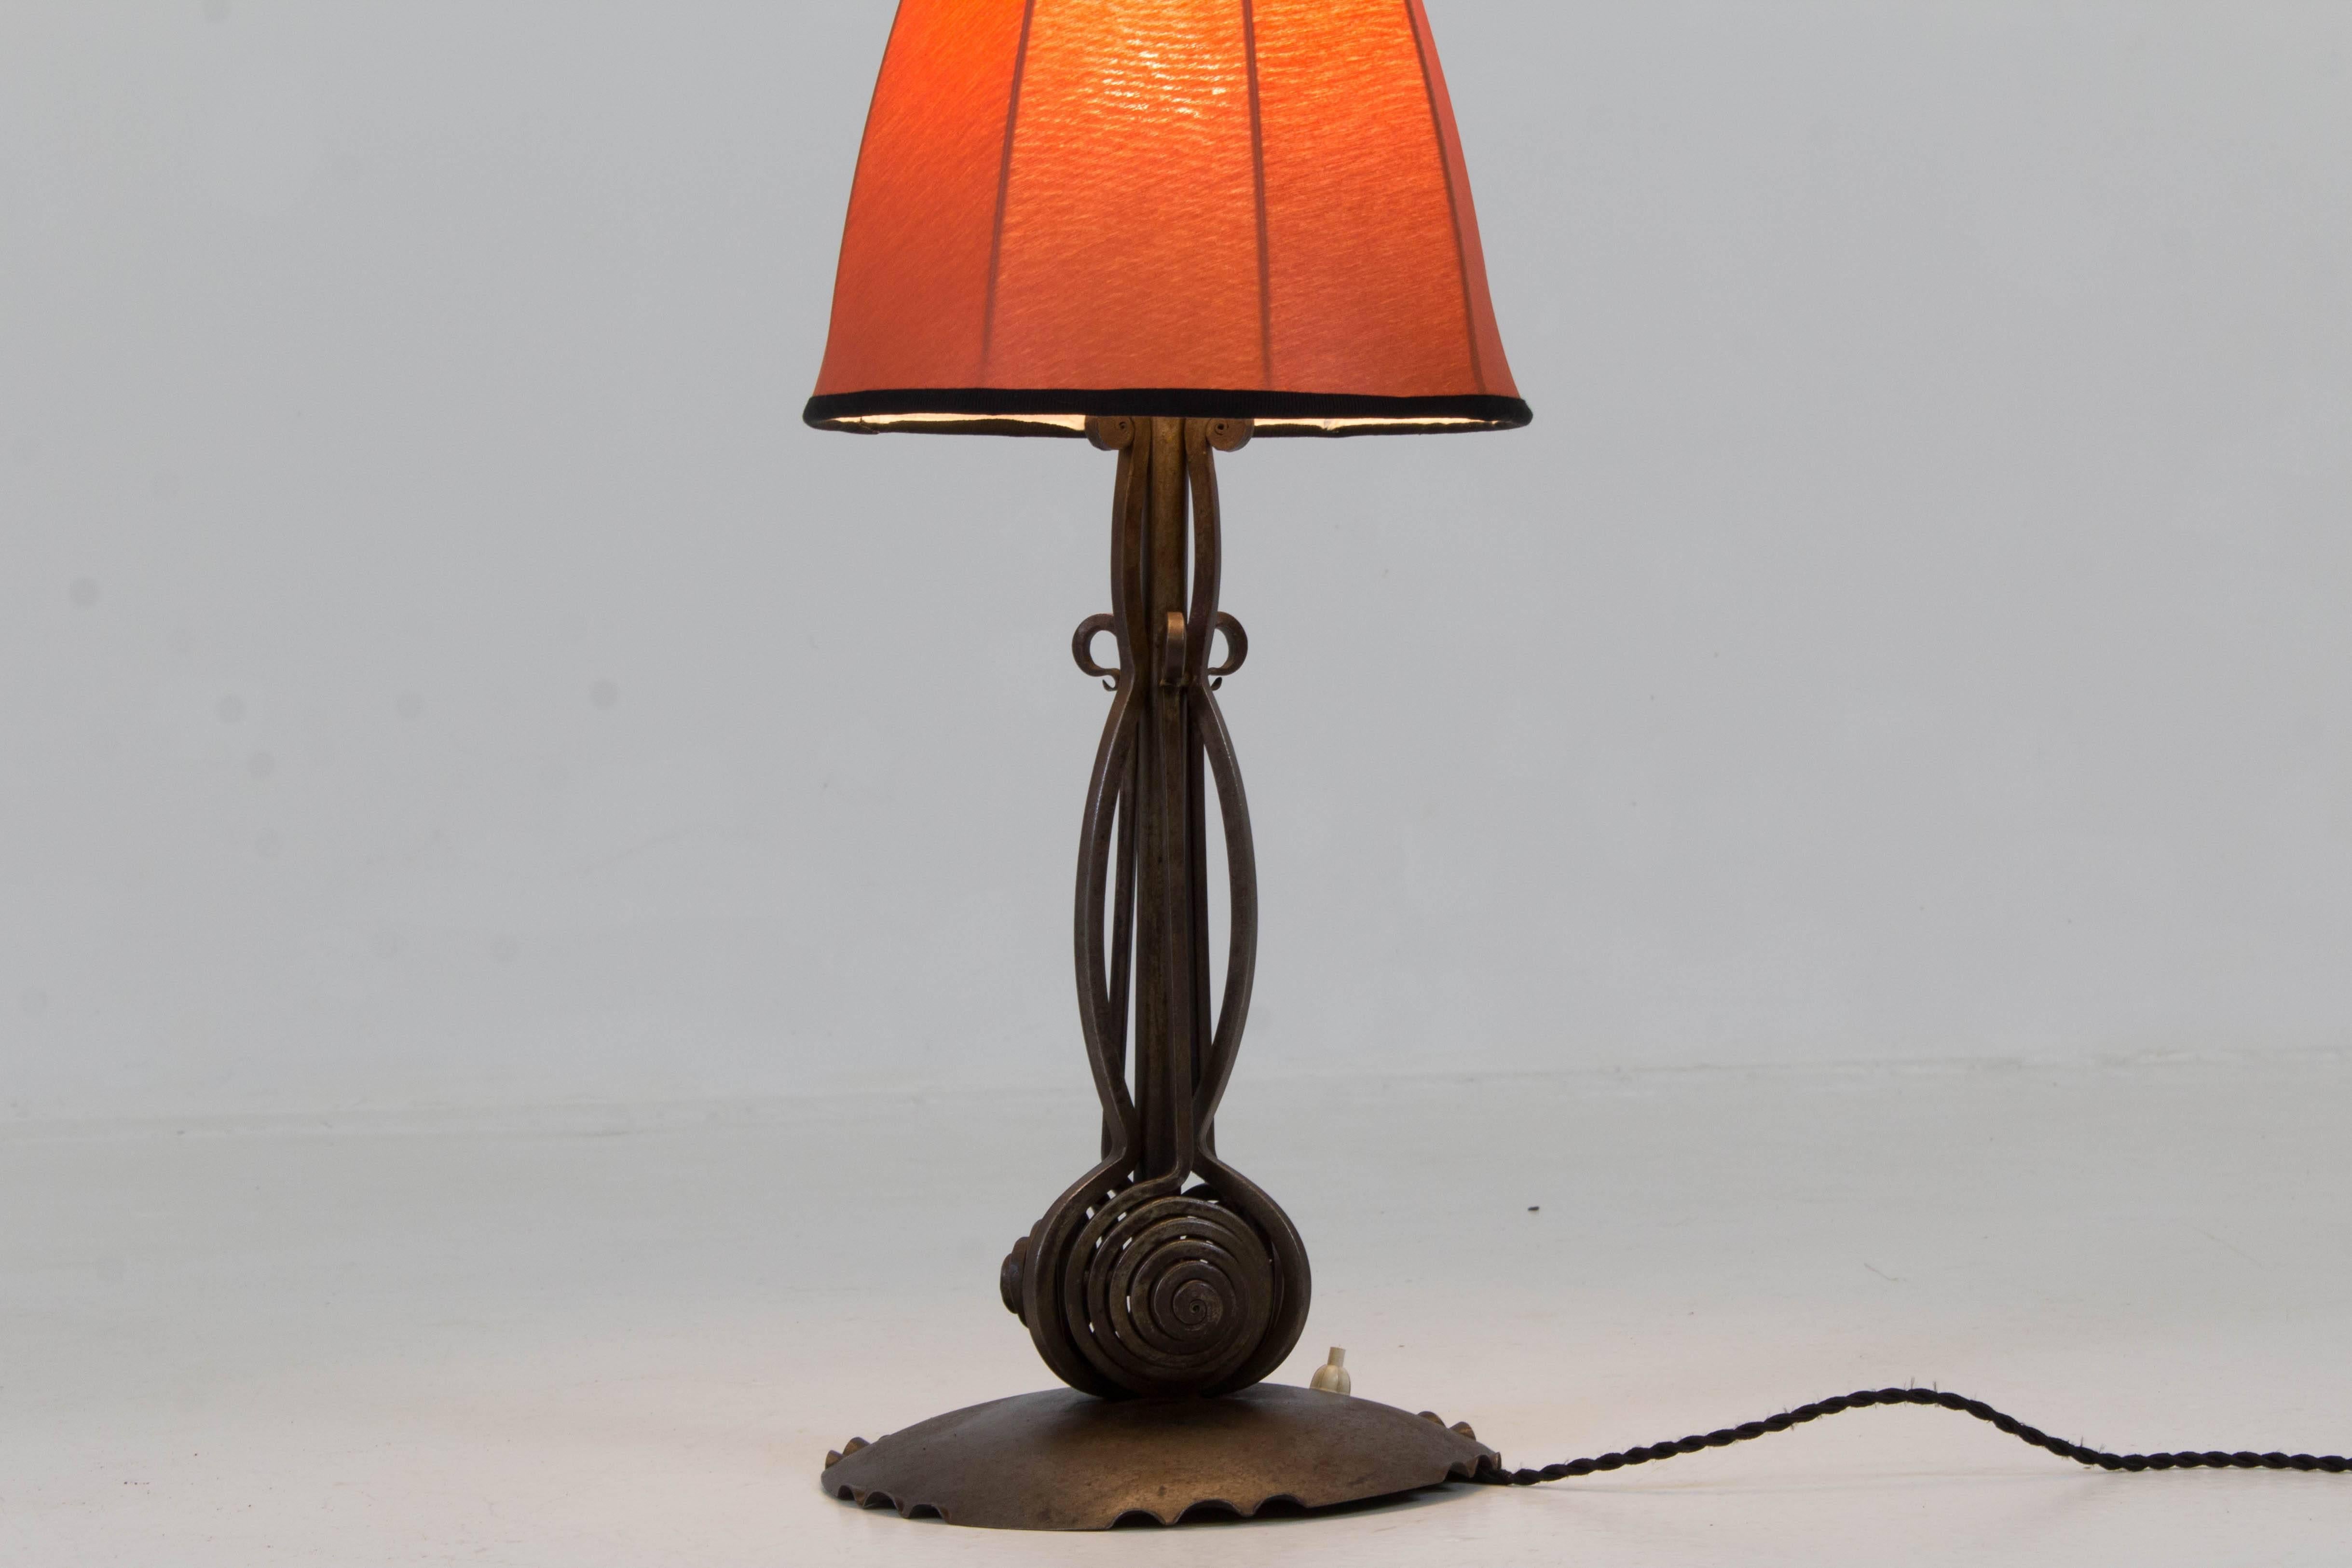 Rare Art Deco Amsterdam School table lamp by Winkelman & Van der Bijl Amsterdam 1920s.
Original wrought iron frame with new made silk shade.
In good original condition with minor wear consistent with age and use,
preserving a beautiful patina.